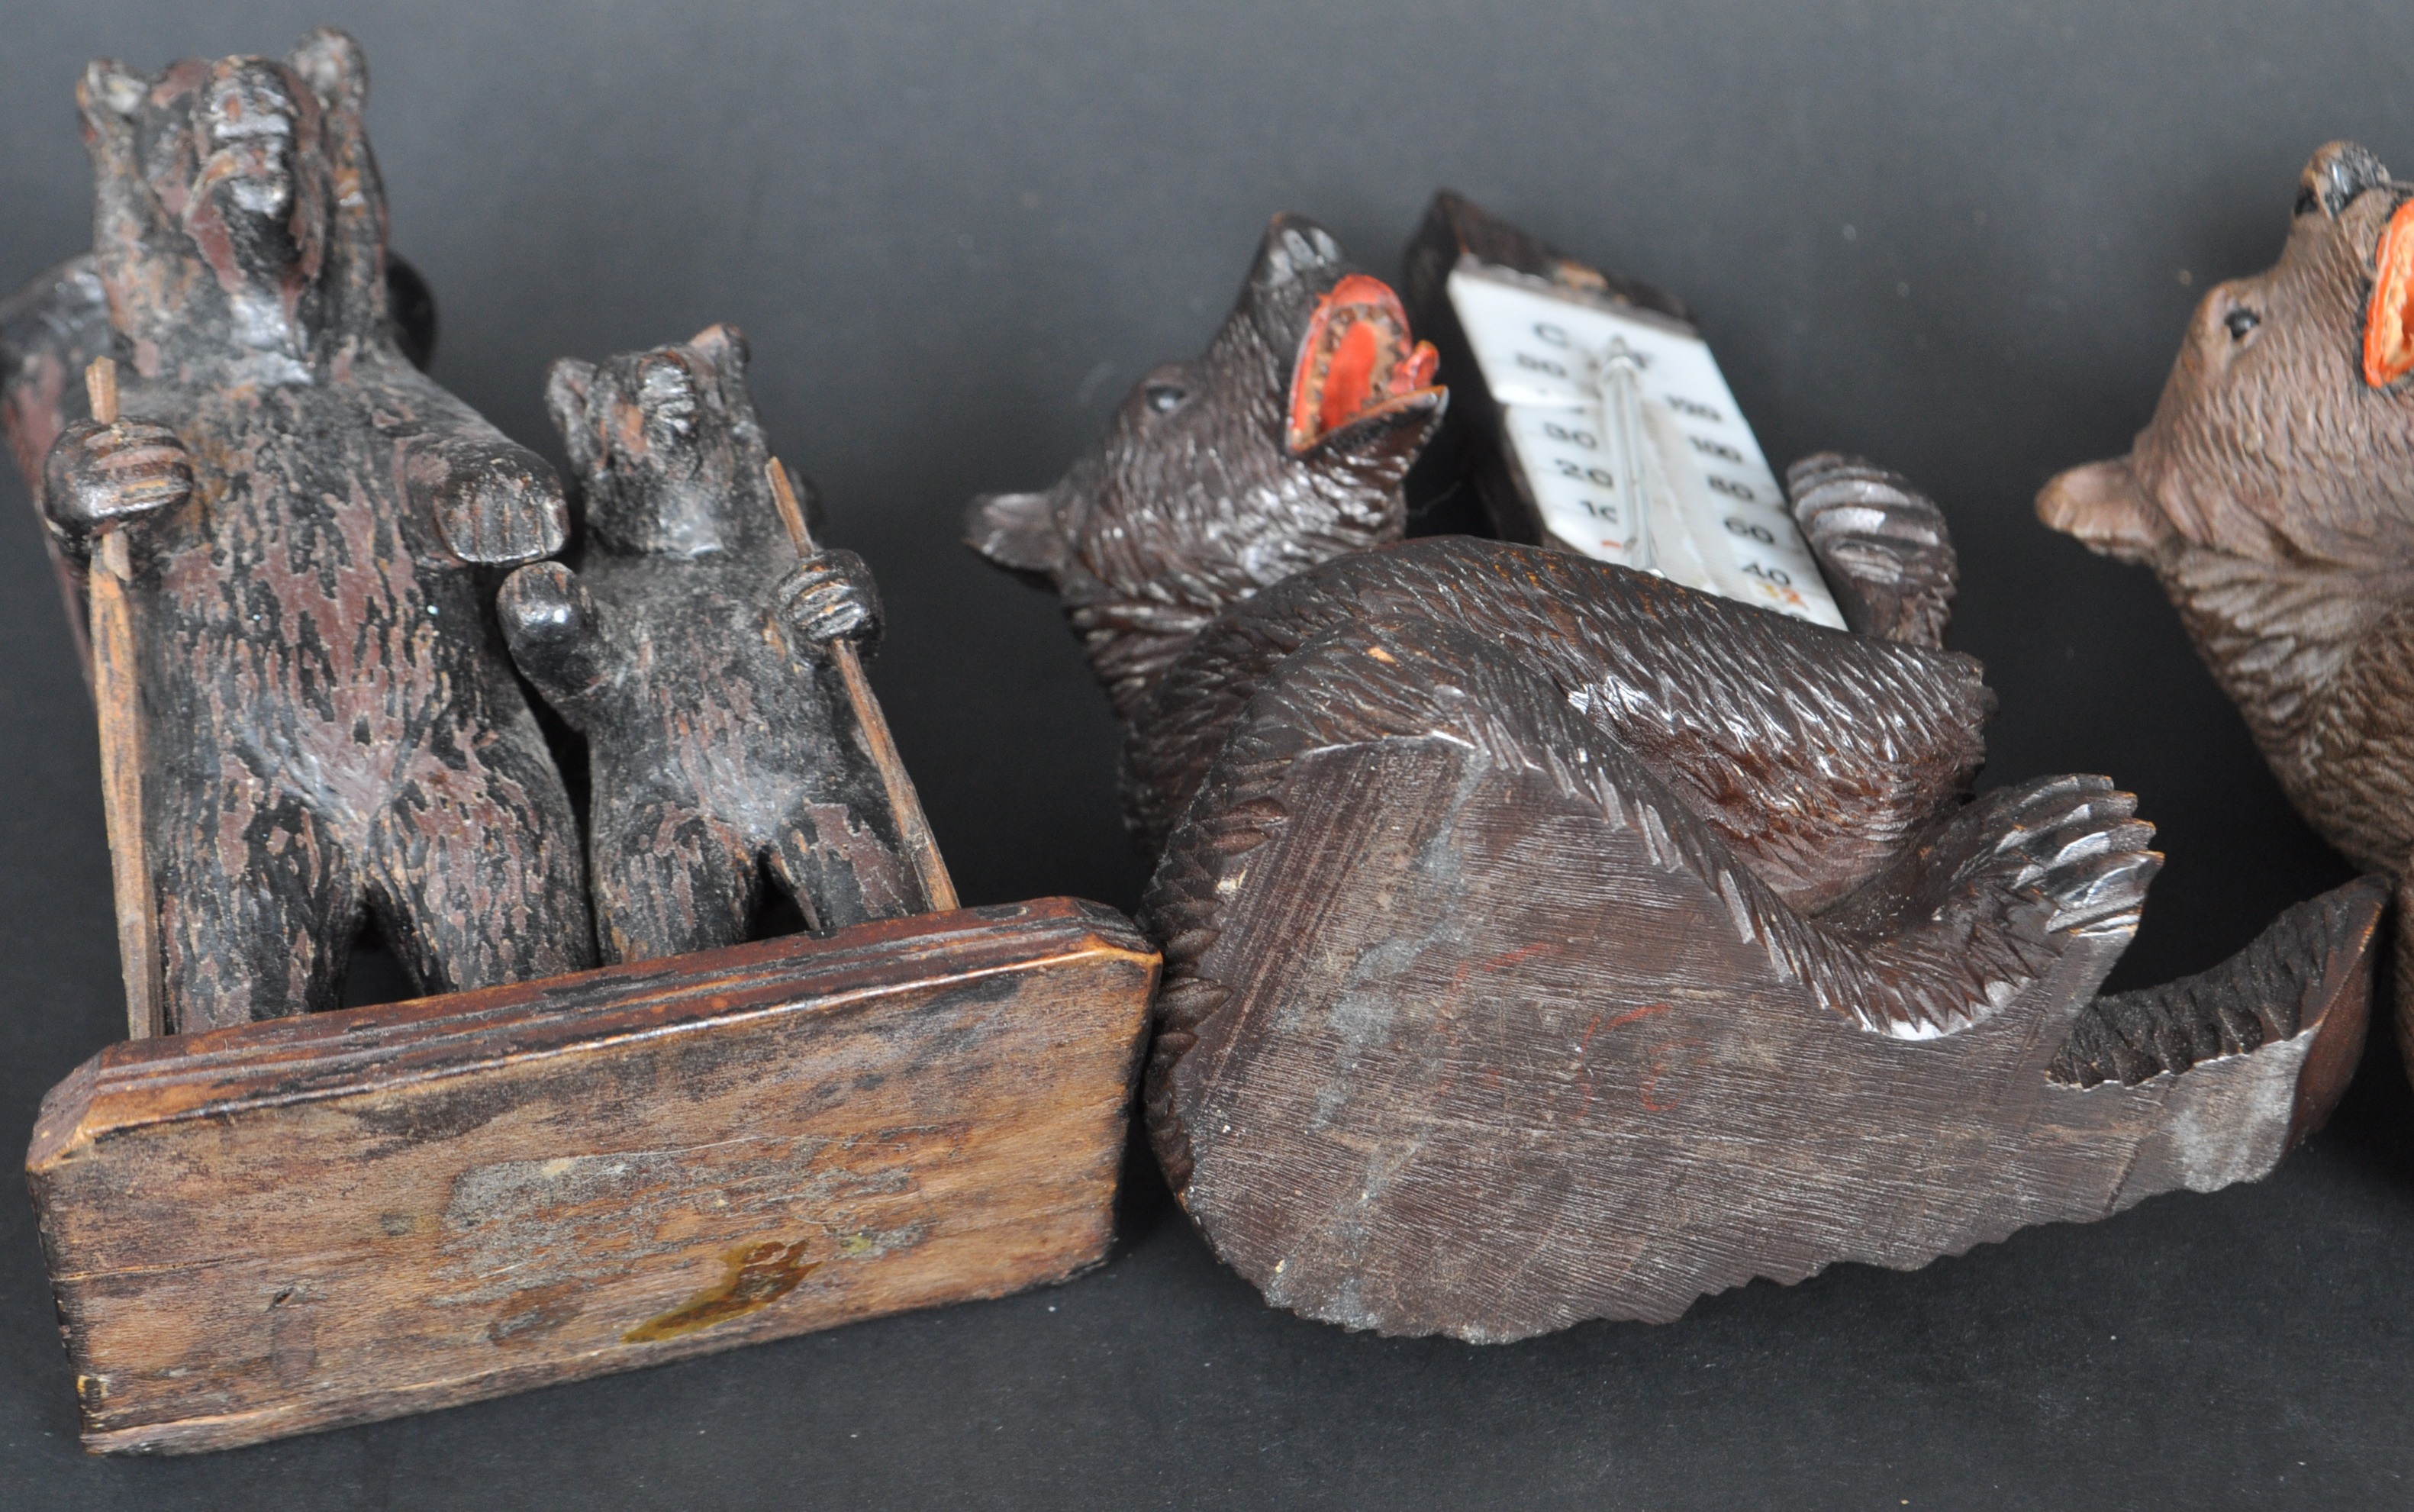 COLLECTION OF FOUR 19TH CENTURY GERMAN BLACK FOREST BEARS - Image 6 of 7